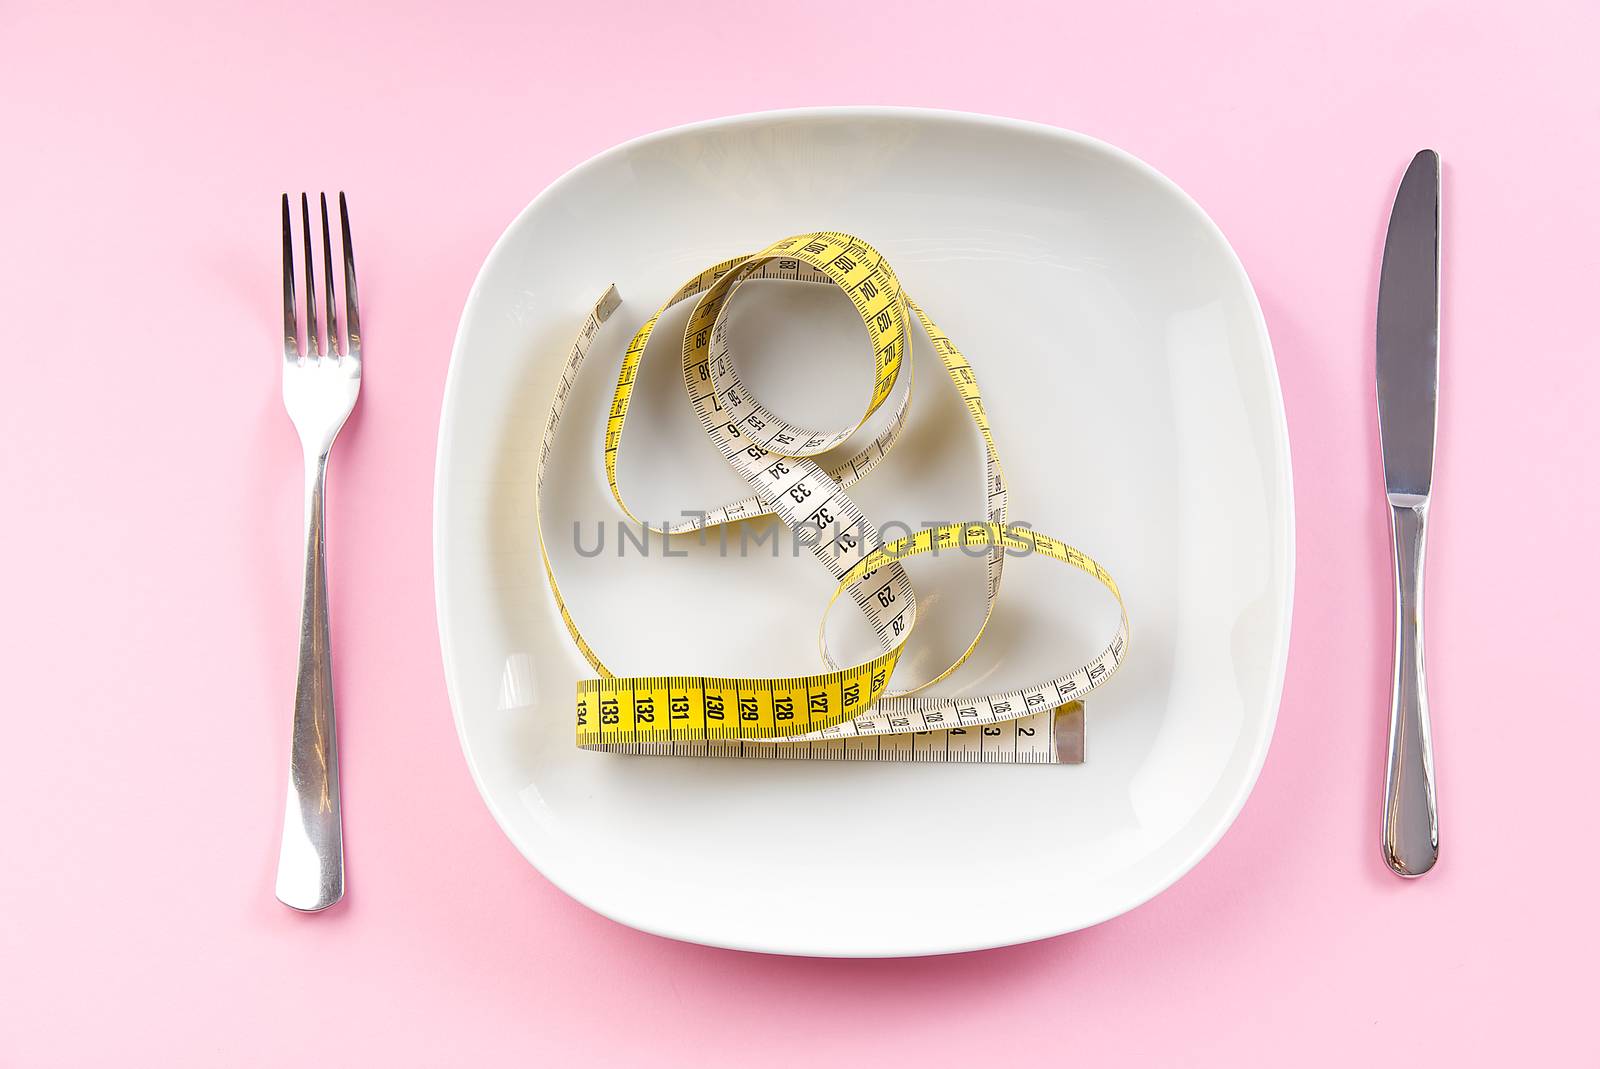 Weight Loss Measuring Tape on white plate, concept of healthy dieting. pink Background. by PhotoTime